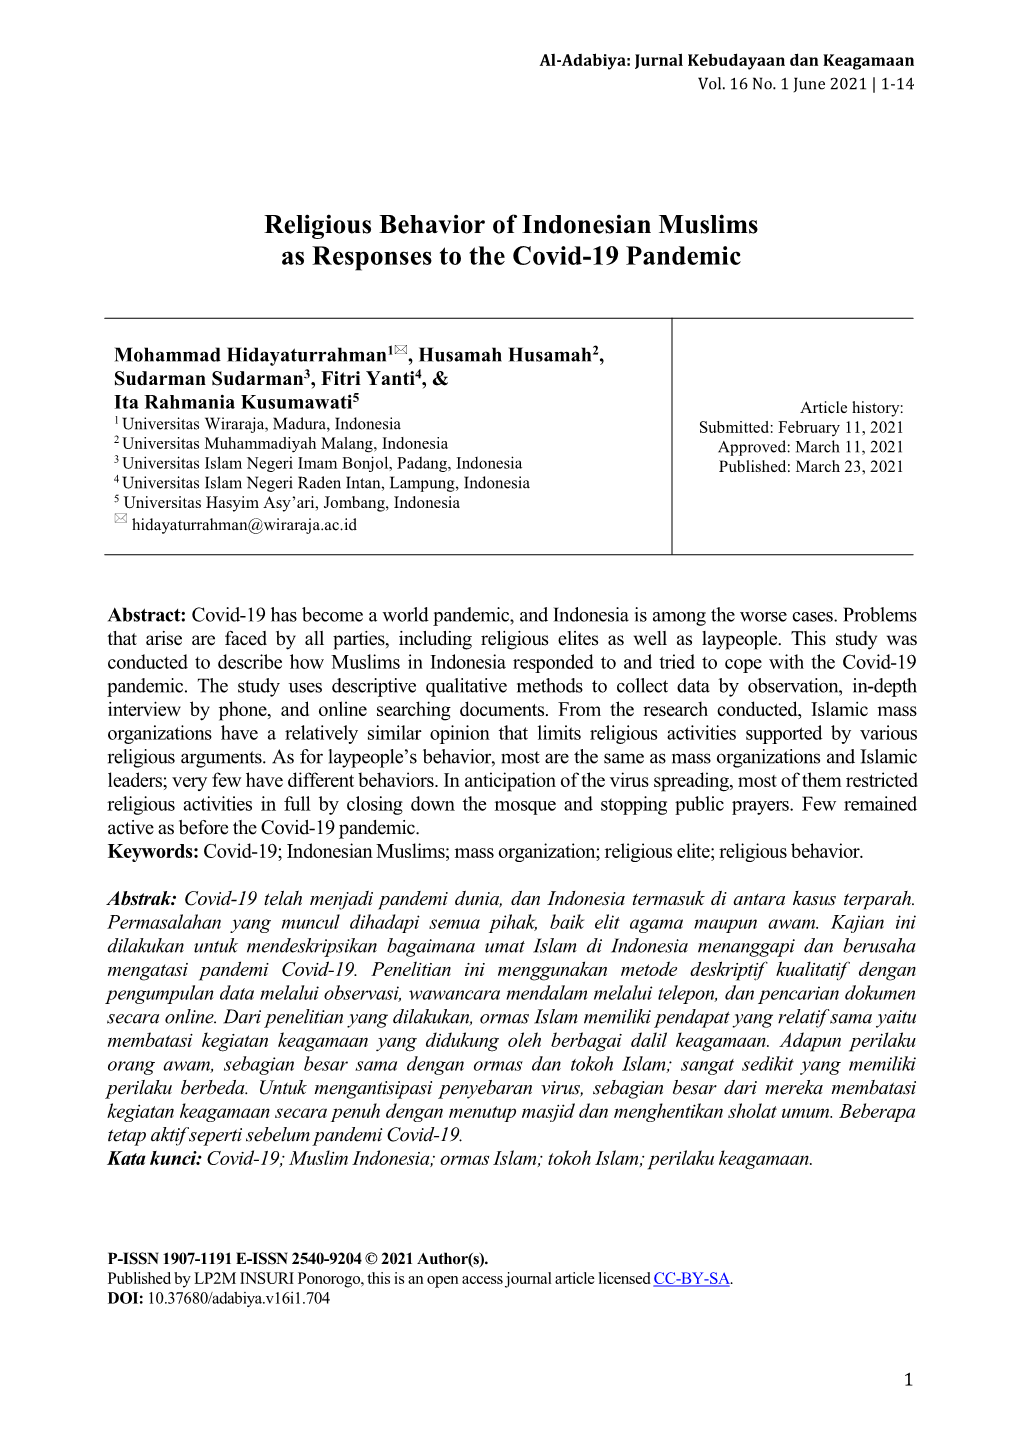 Religious Behavior of Indonesian Muslims As Responses to the Covid-19 Pandemic